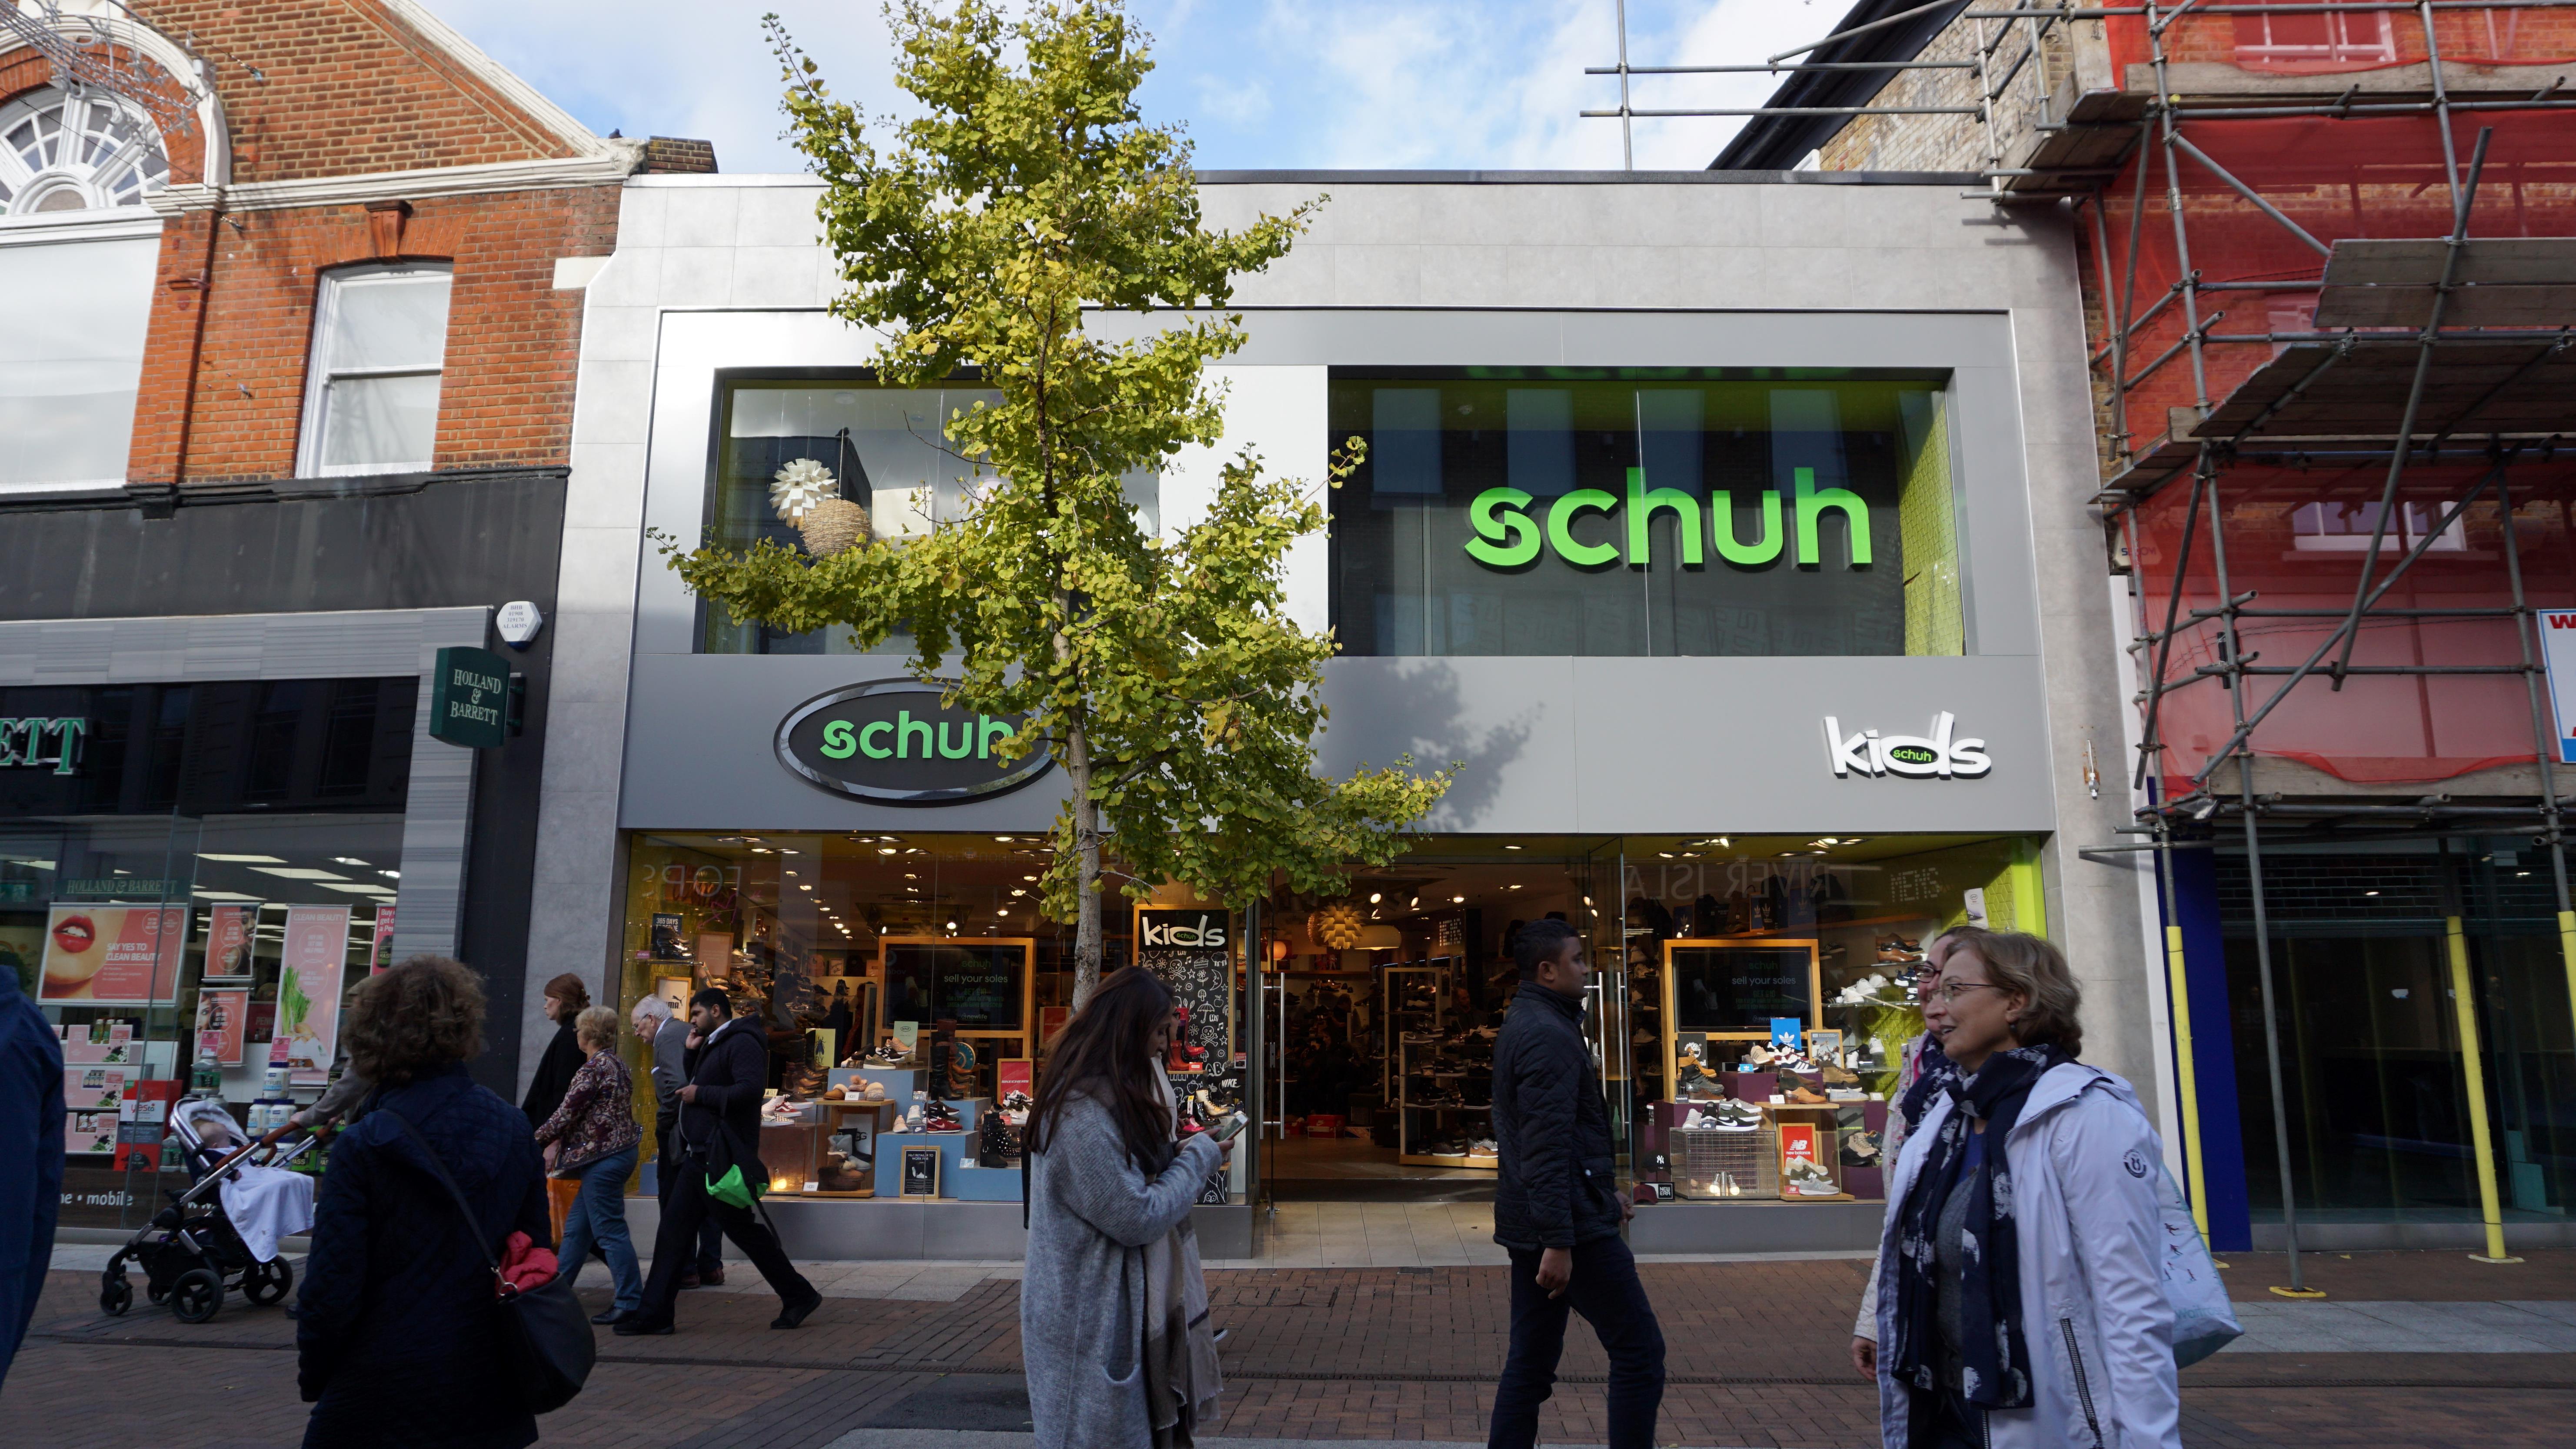 Schuh invites customers to “Sell Your Soles”